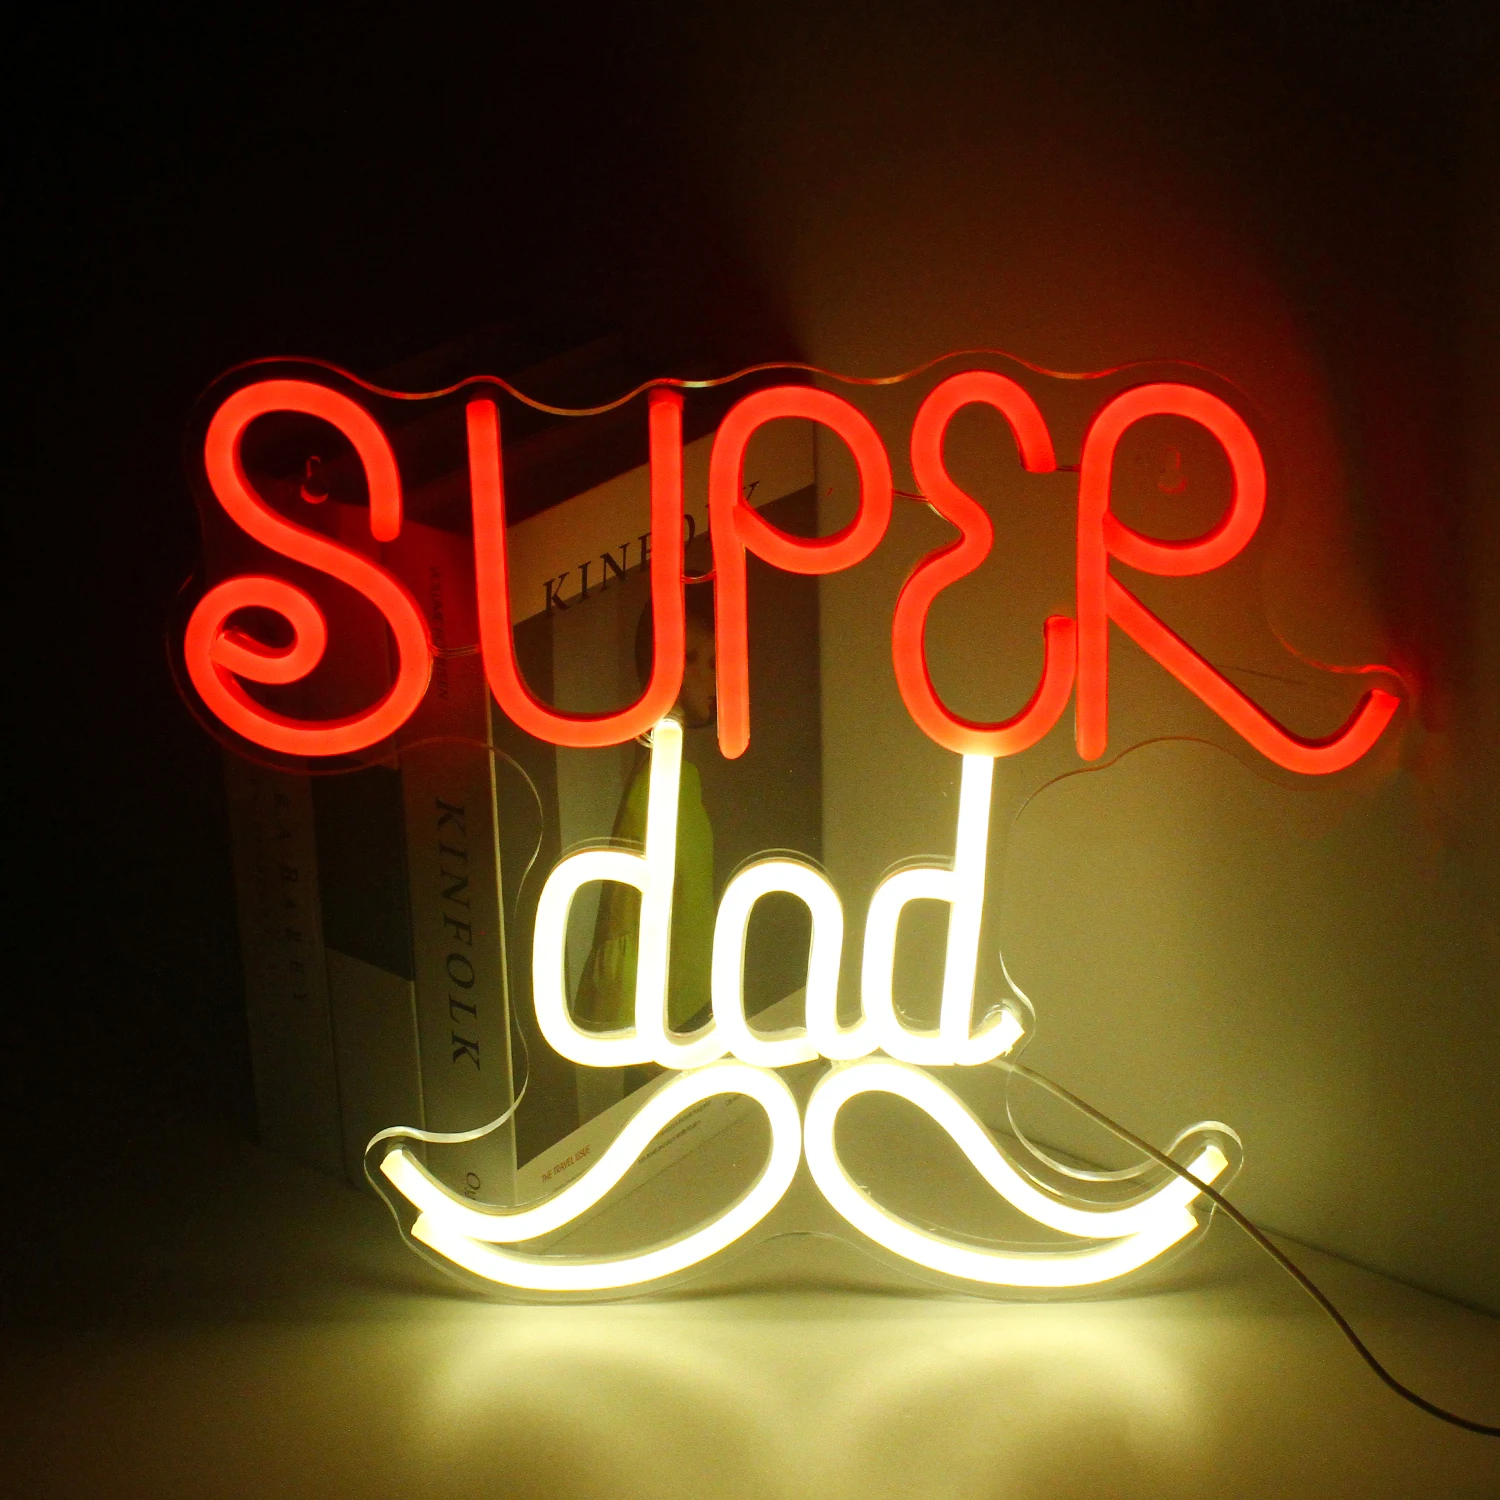 ineonlife Neon Sign Acrylic super dad Custom ight Sign Ins Home Wall Bar Party Club shop aesthetic room Home Bedroom Decor Gift